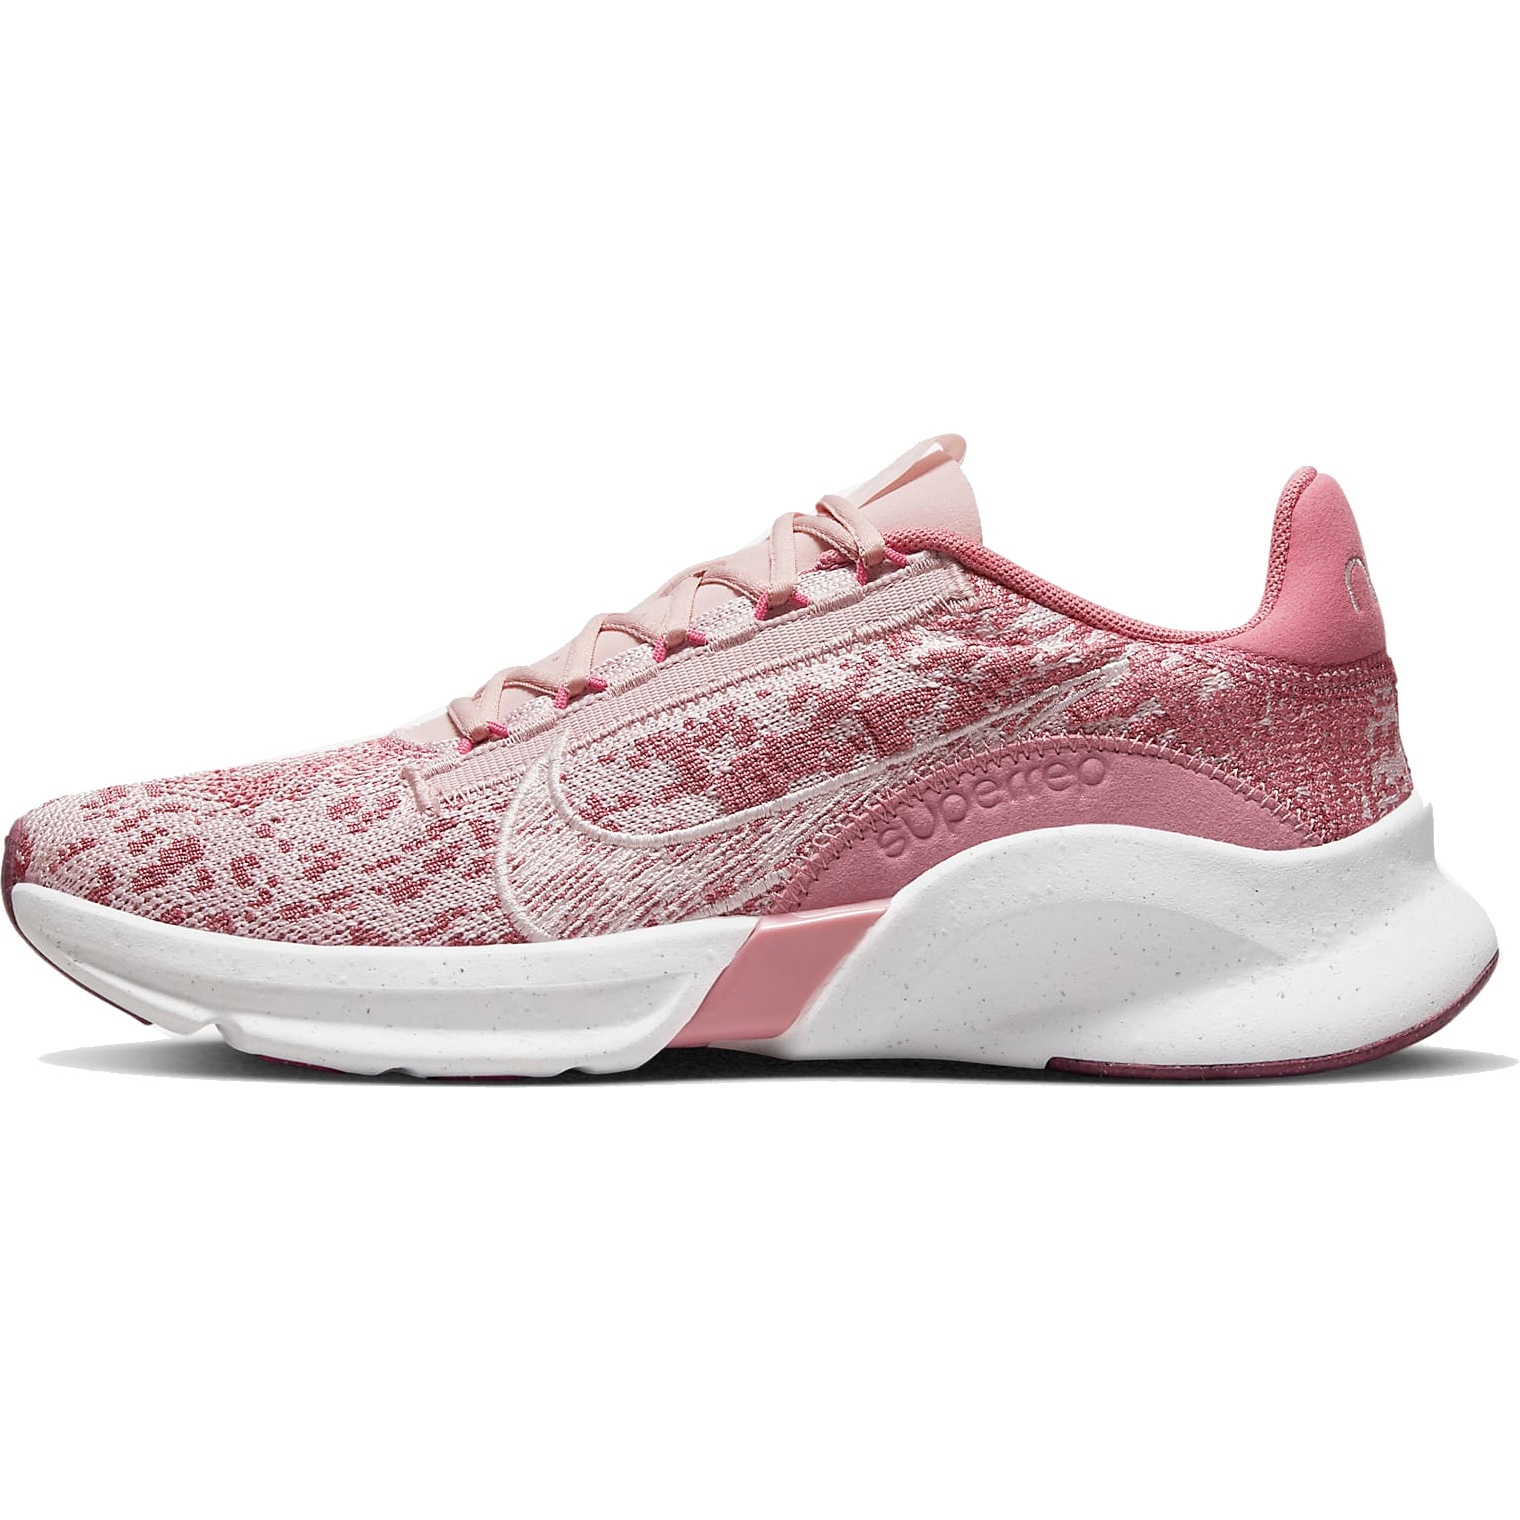 Picture of Nike SuperRep Go 3 Flyknit Next Nature Training Shoes Women - desert berry/sail-barely rose DH3393-600